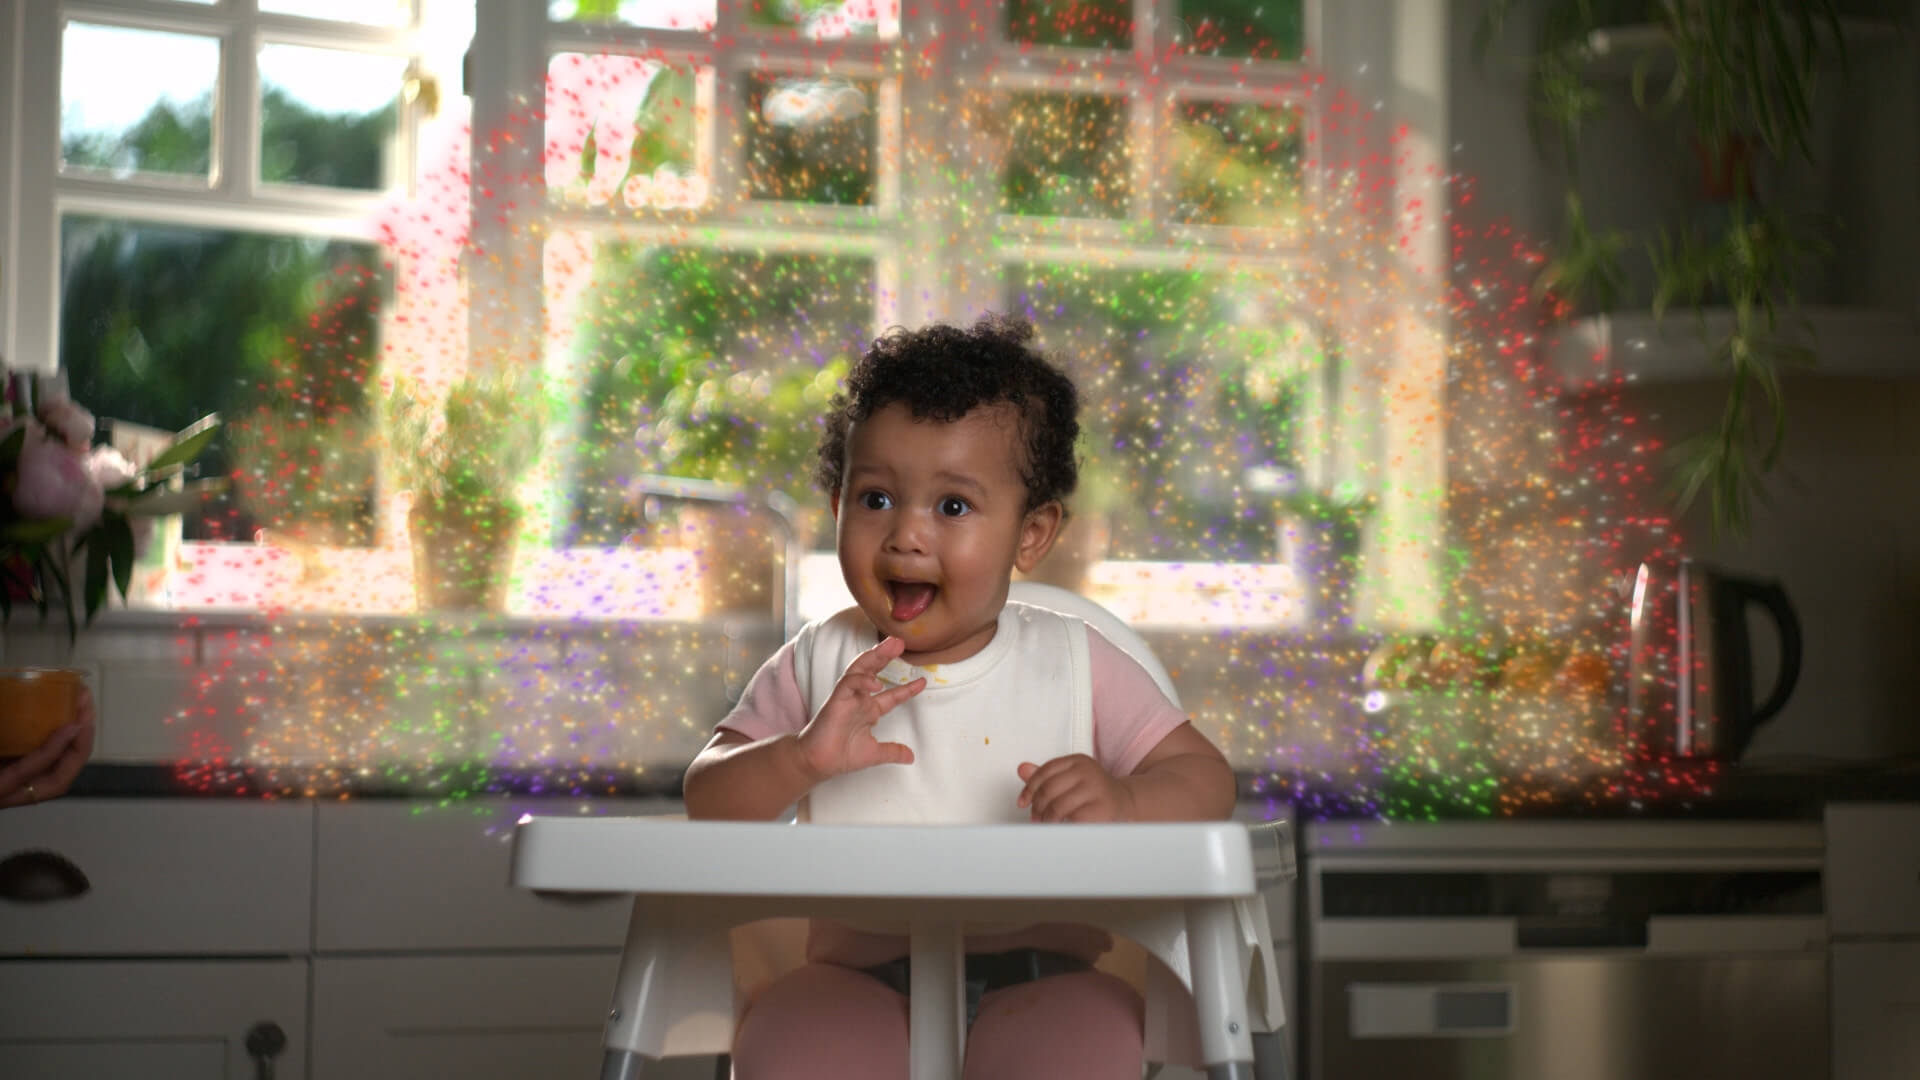 A baby sitting on a high chair with an animated rainbow around her in red, orange, green and blue